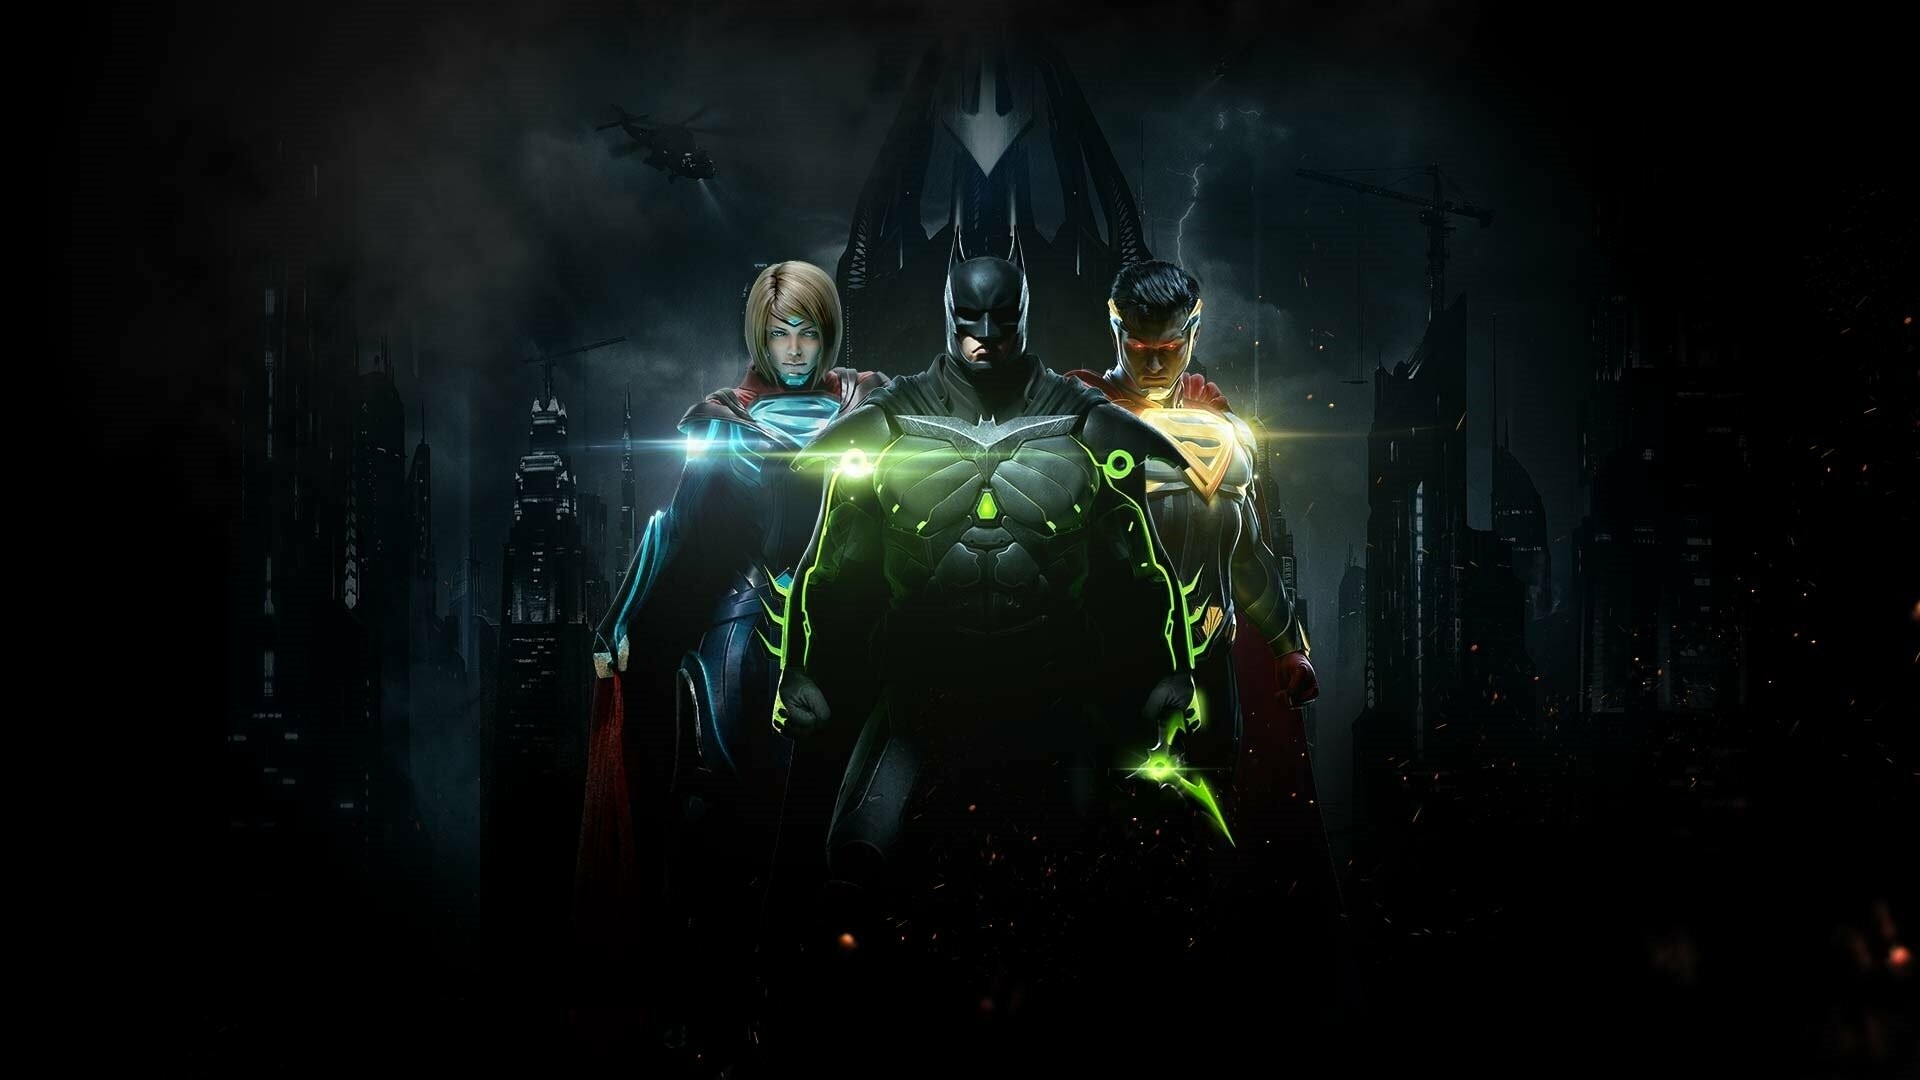 Injustice: An action fighting video game based on the DC Comics universe. 1920x1080 Full HD Background.